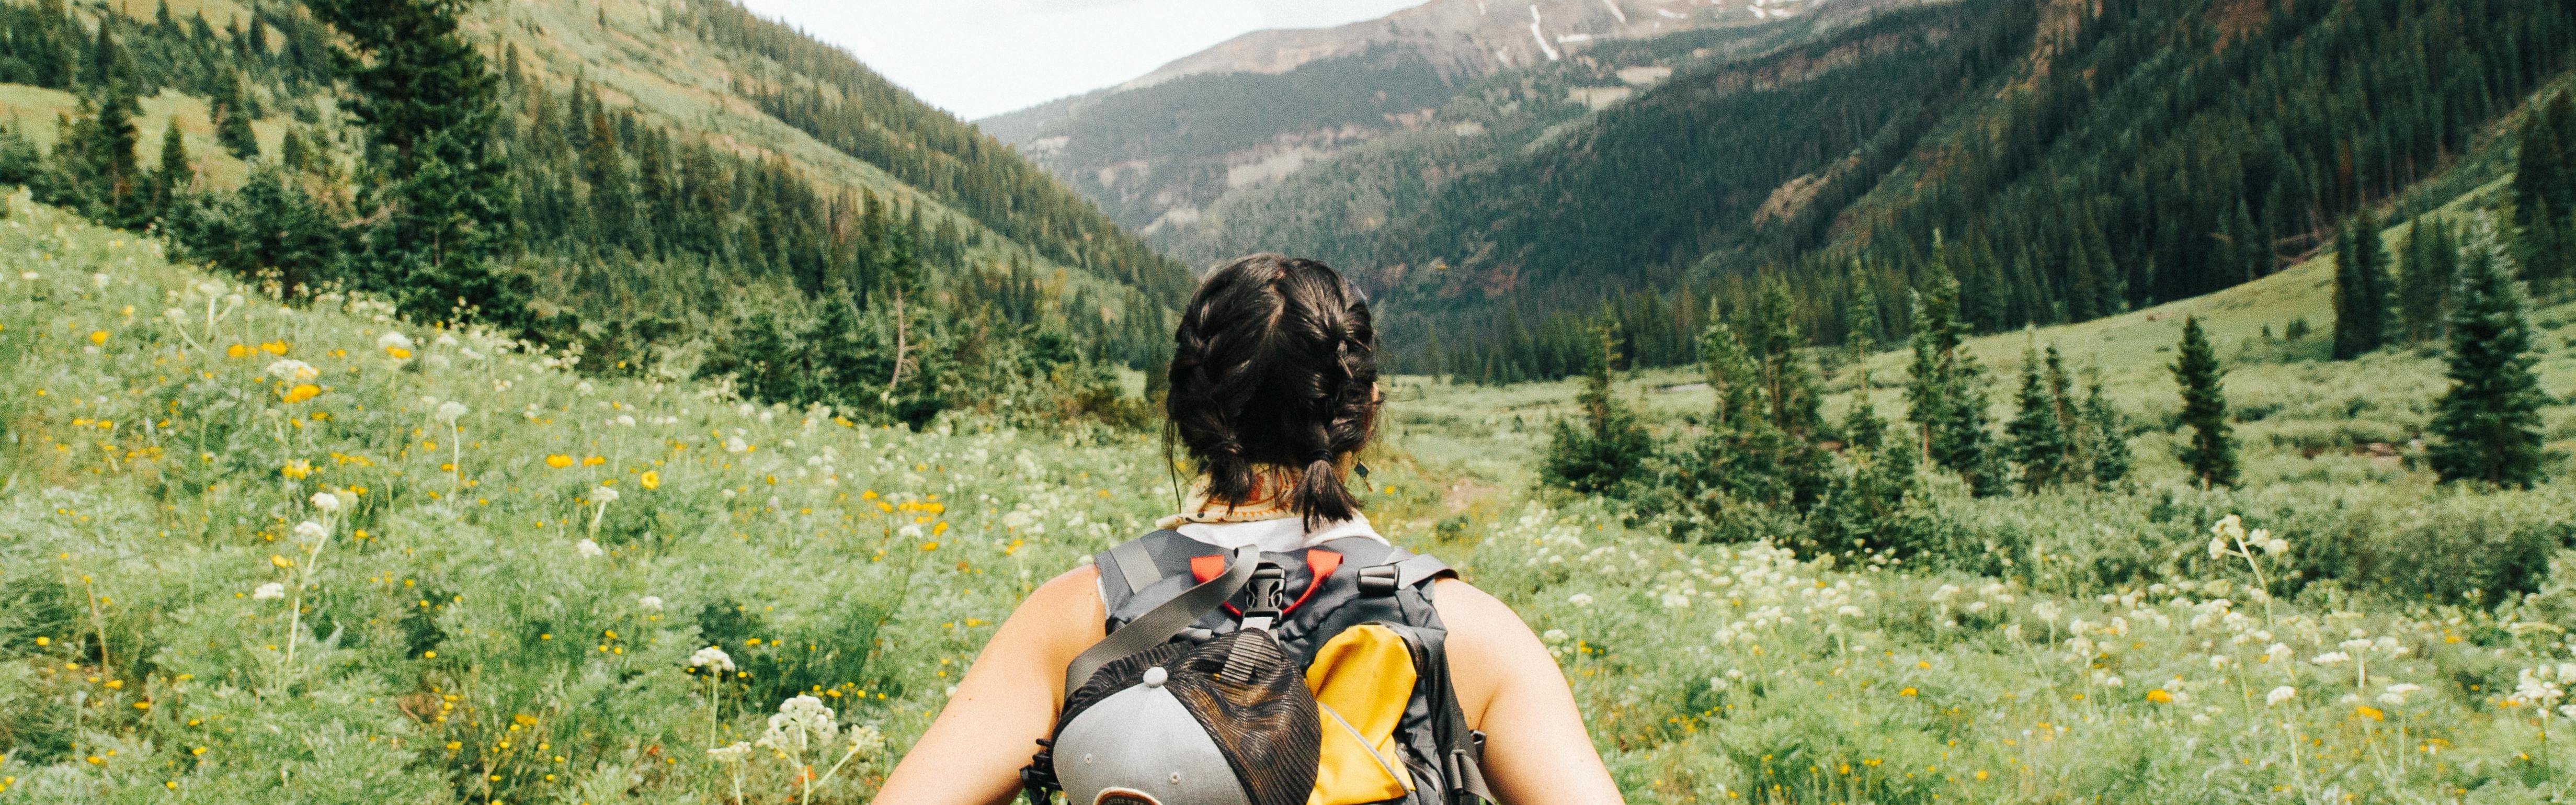 A woman in a tanktop hikes away from the camera while wearing a backpack.